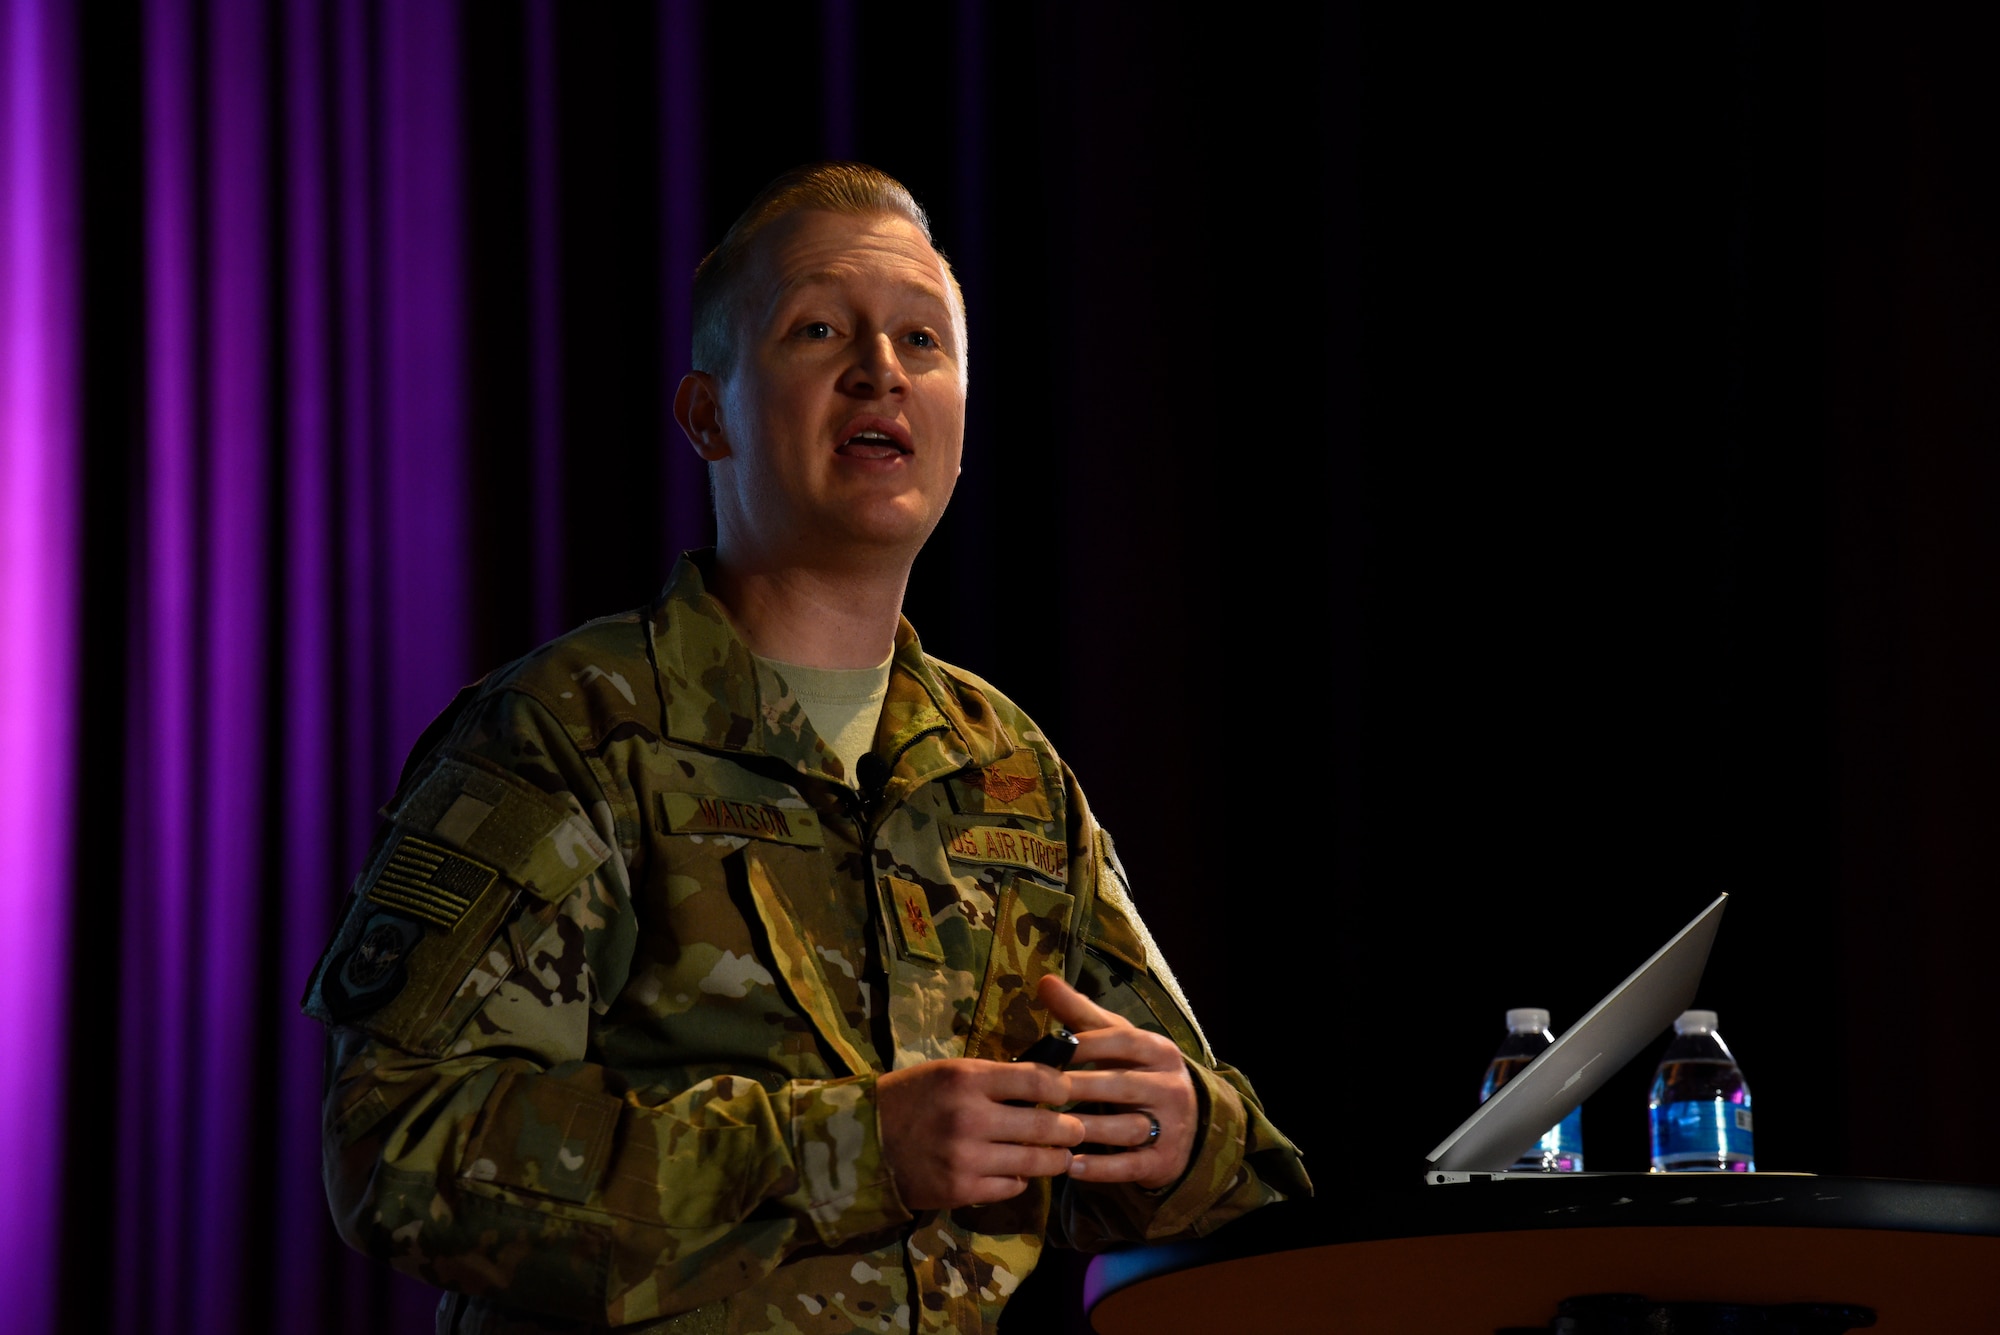 U.S. Air Force Maj. Mark Watson, 92nd Operations Group chief of training, presents a case study on creating an innovative culture during the 2019 Leaders Inspiring for Tomorrow summit in the base theater at Fairchild Air Force Base, Washington, April 19, 2019. LIFT is an engaging showcase that highlights numerous speakers, sharing their stories of inspiration, innovation, character and leadership. (U.S. Air Force photo by Airman 1st Class Lawrence Sena)